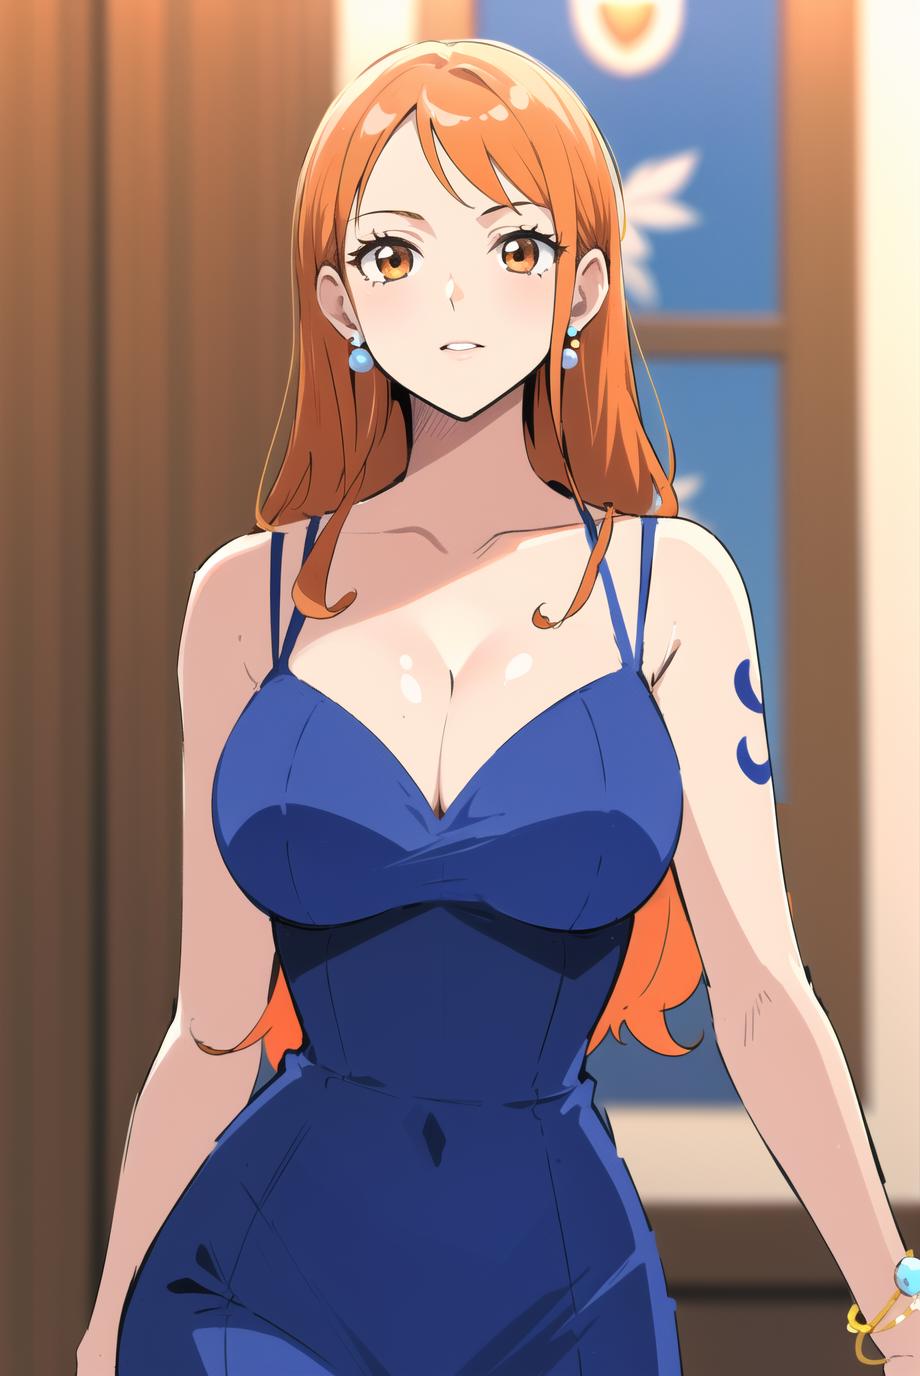 A cartoon or anime female character with a blue dress and a blue tattoo on her arm. The character is standing in front of a window, with her hair in a ponytail.